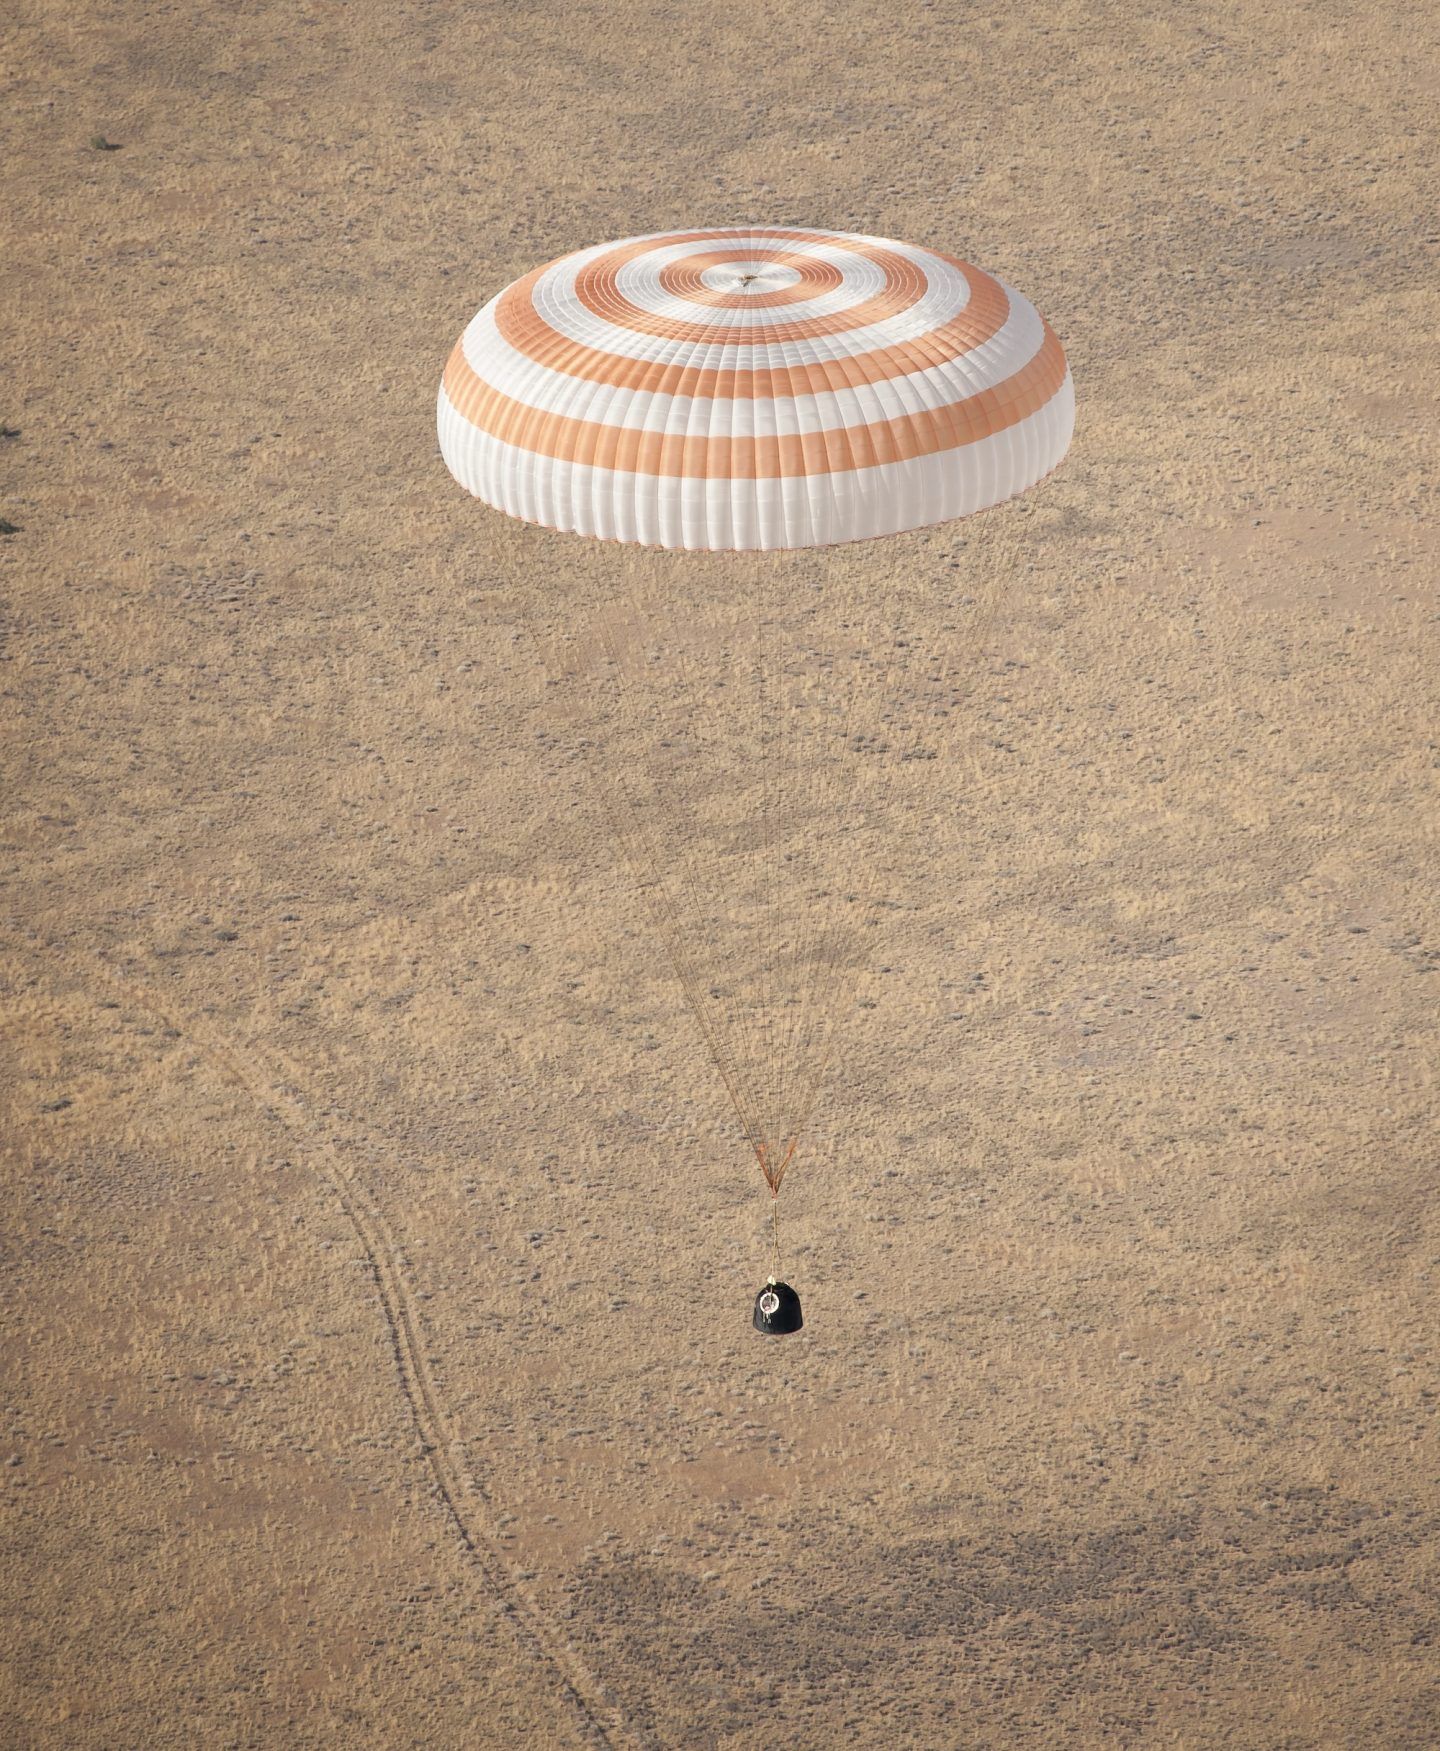 Expedition 28 Landing